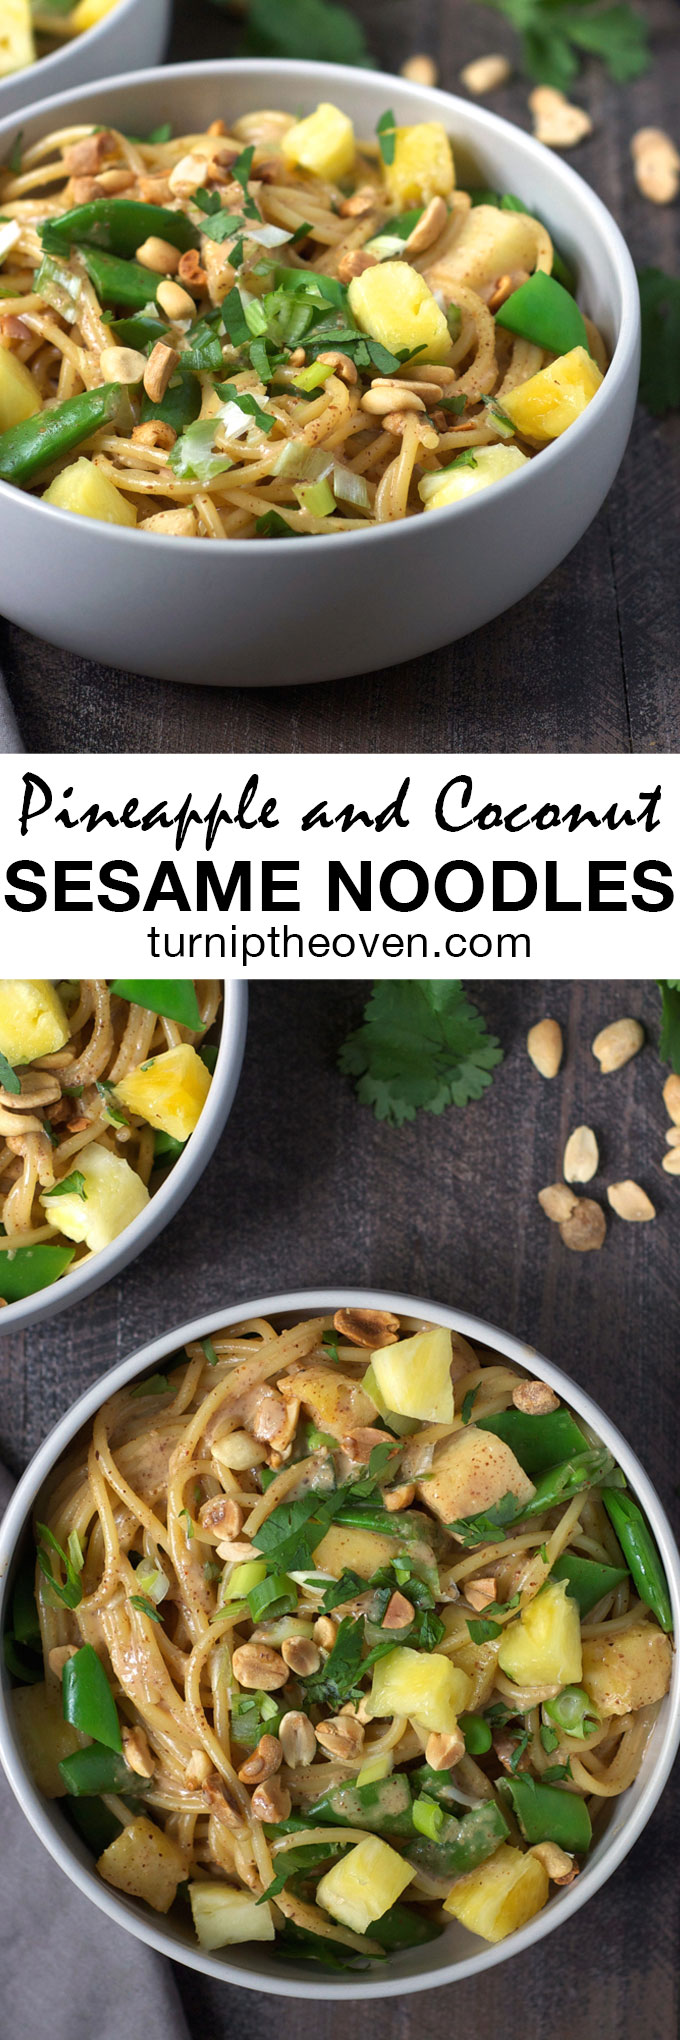 Sesame noodles are given a luxurious, tropical makeover with coconut milk and chunks of juicy fresh pineapple! This healthy, vegan dish is easy enough for a week night dinner, and leftovers are great for lunch all week.